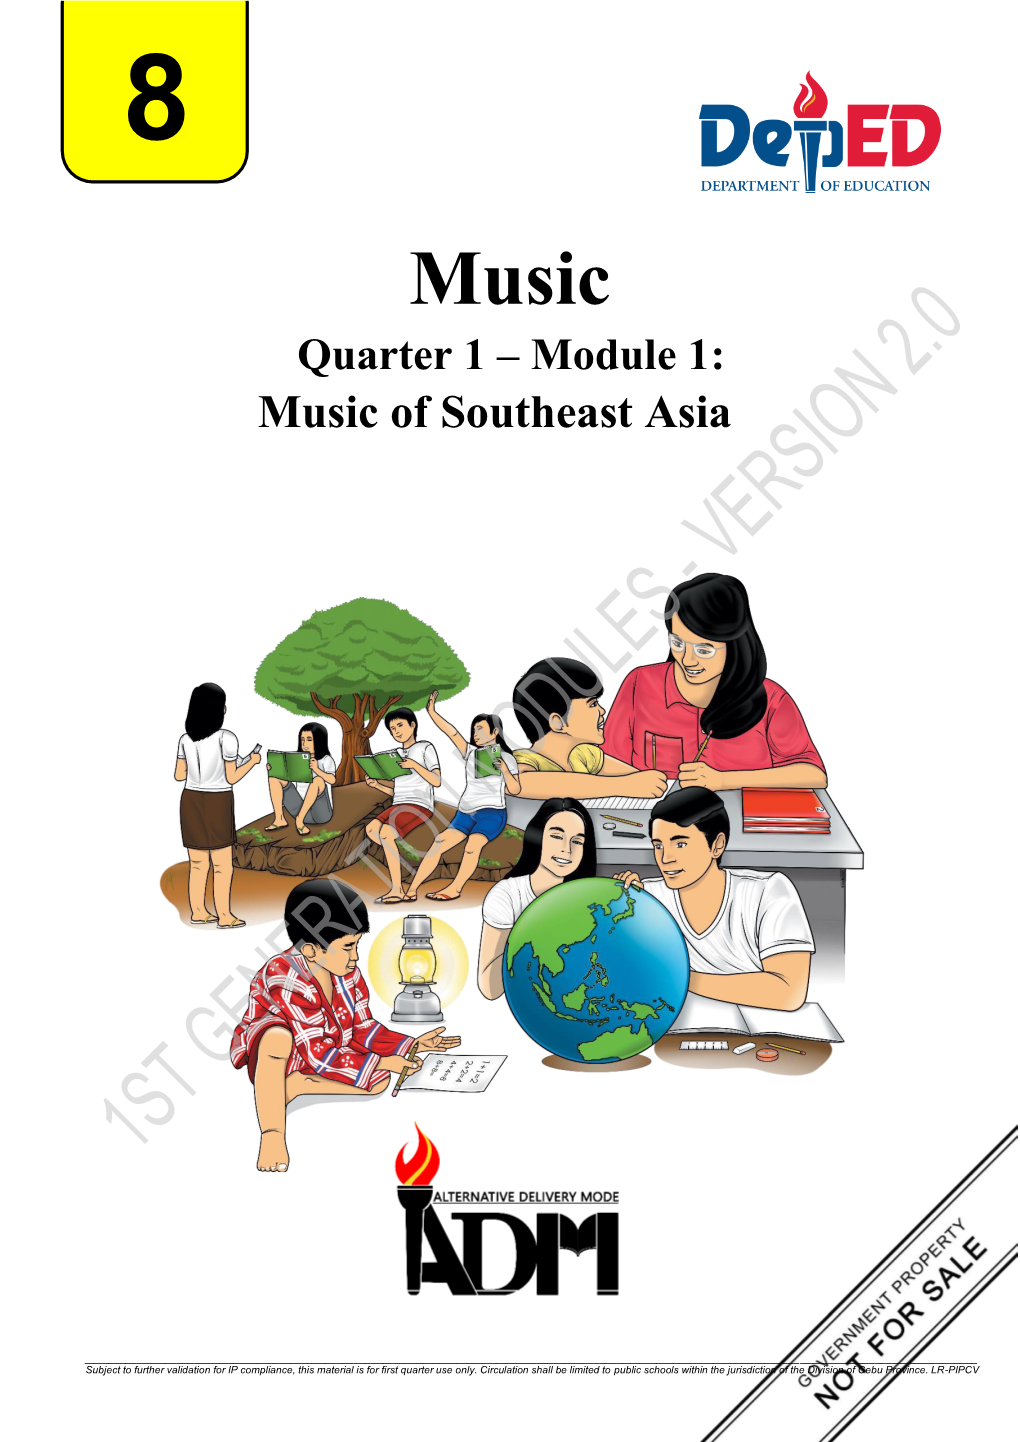 Music of Southeast Asia